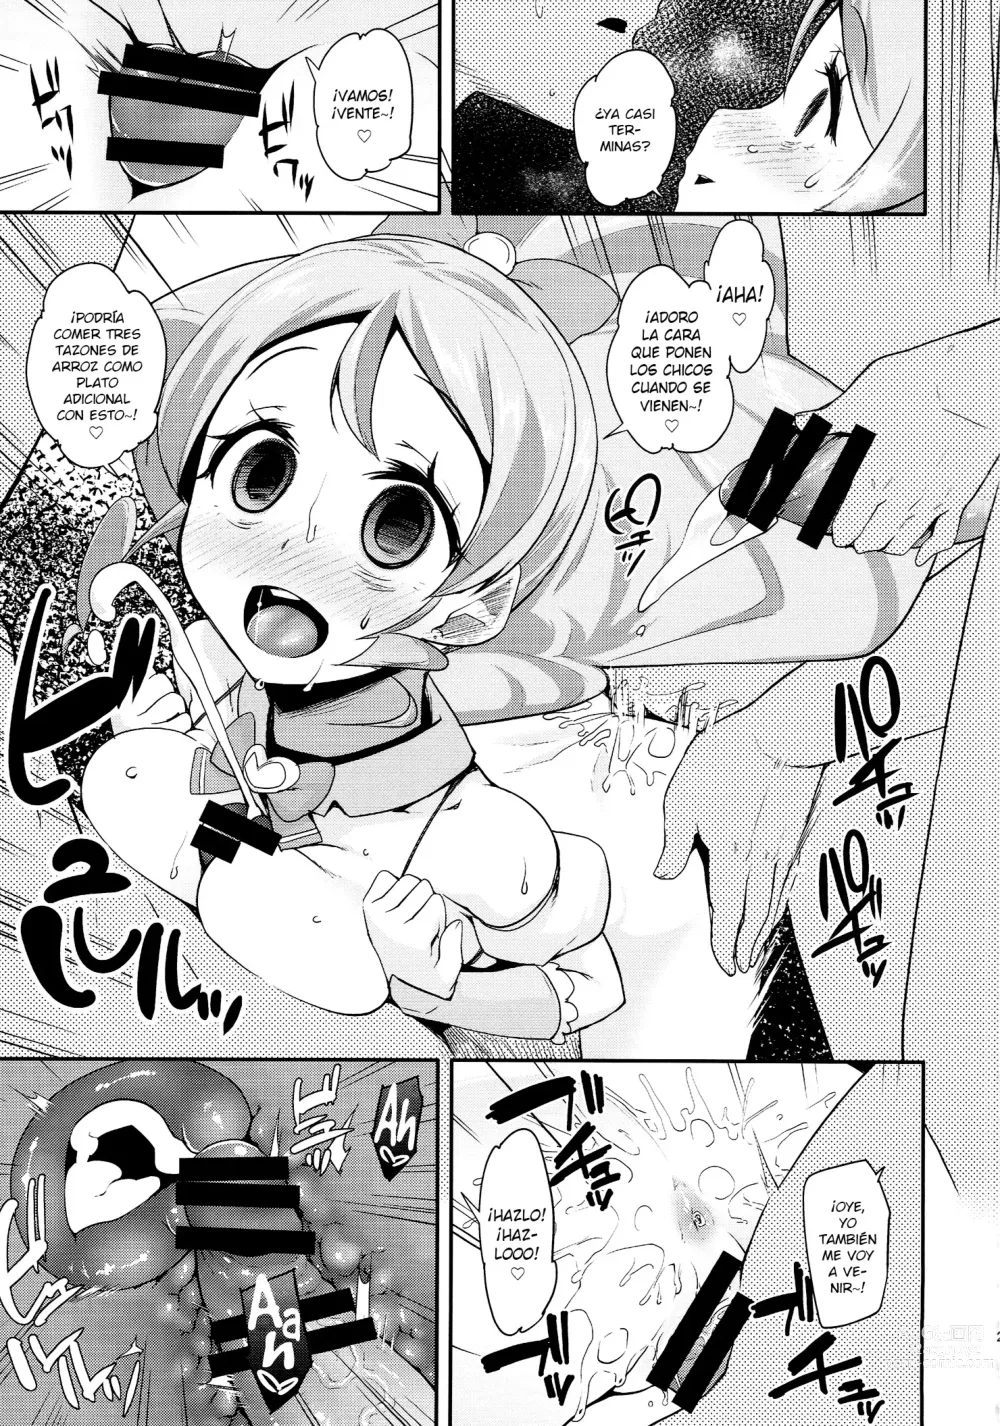 Page 58 of doujinshi Happiness experience 1 + 2